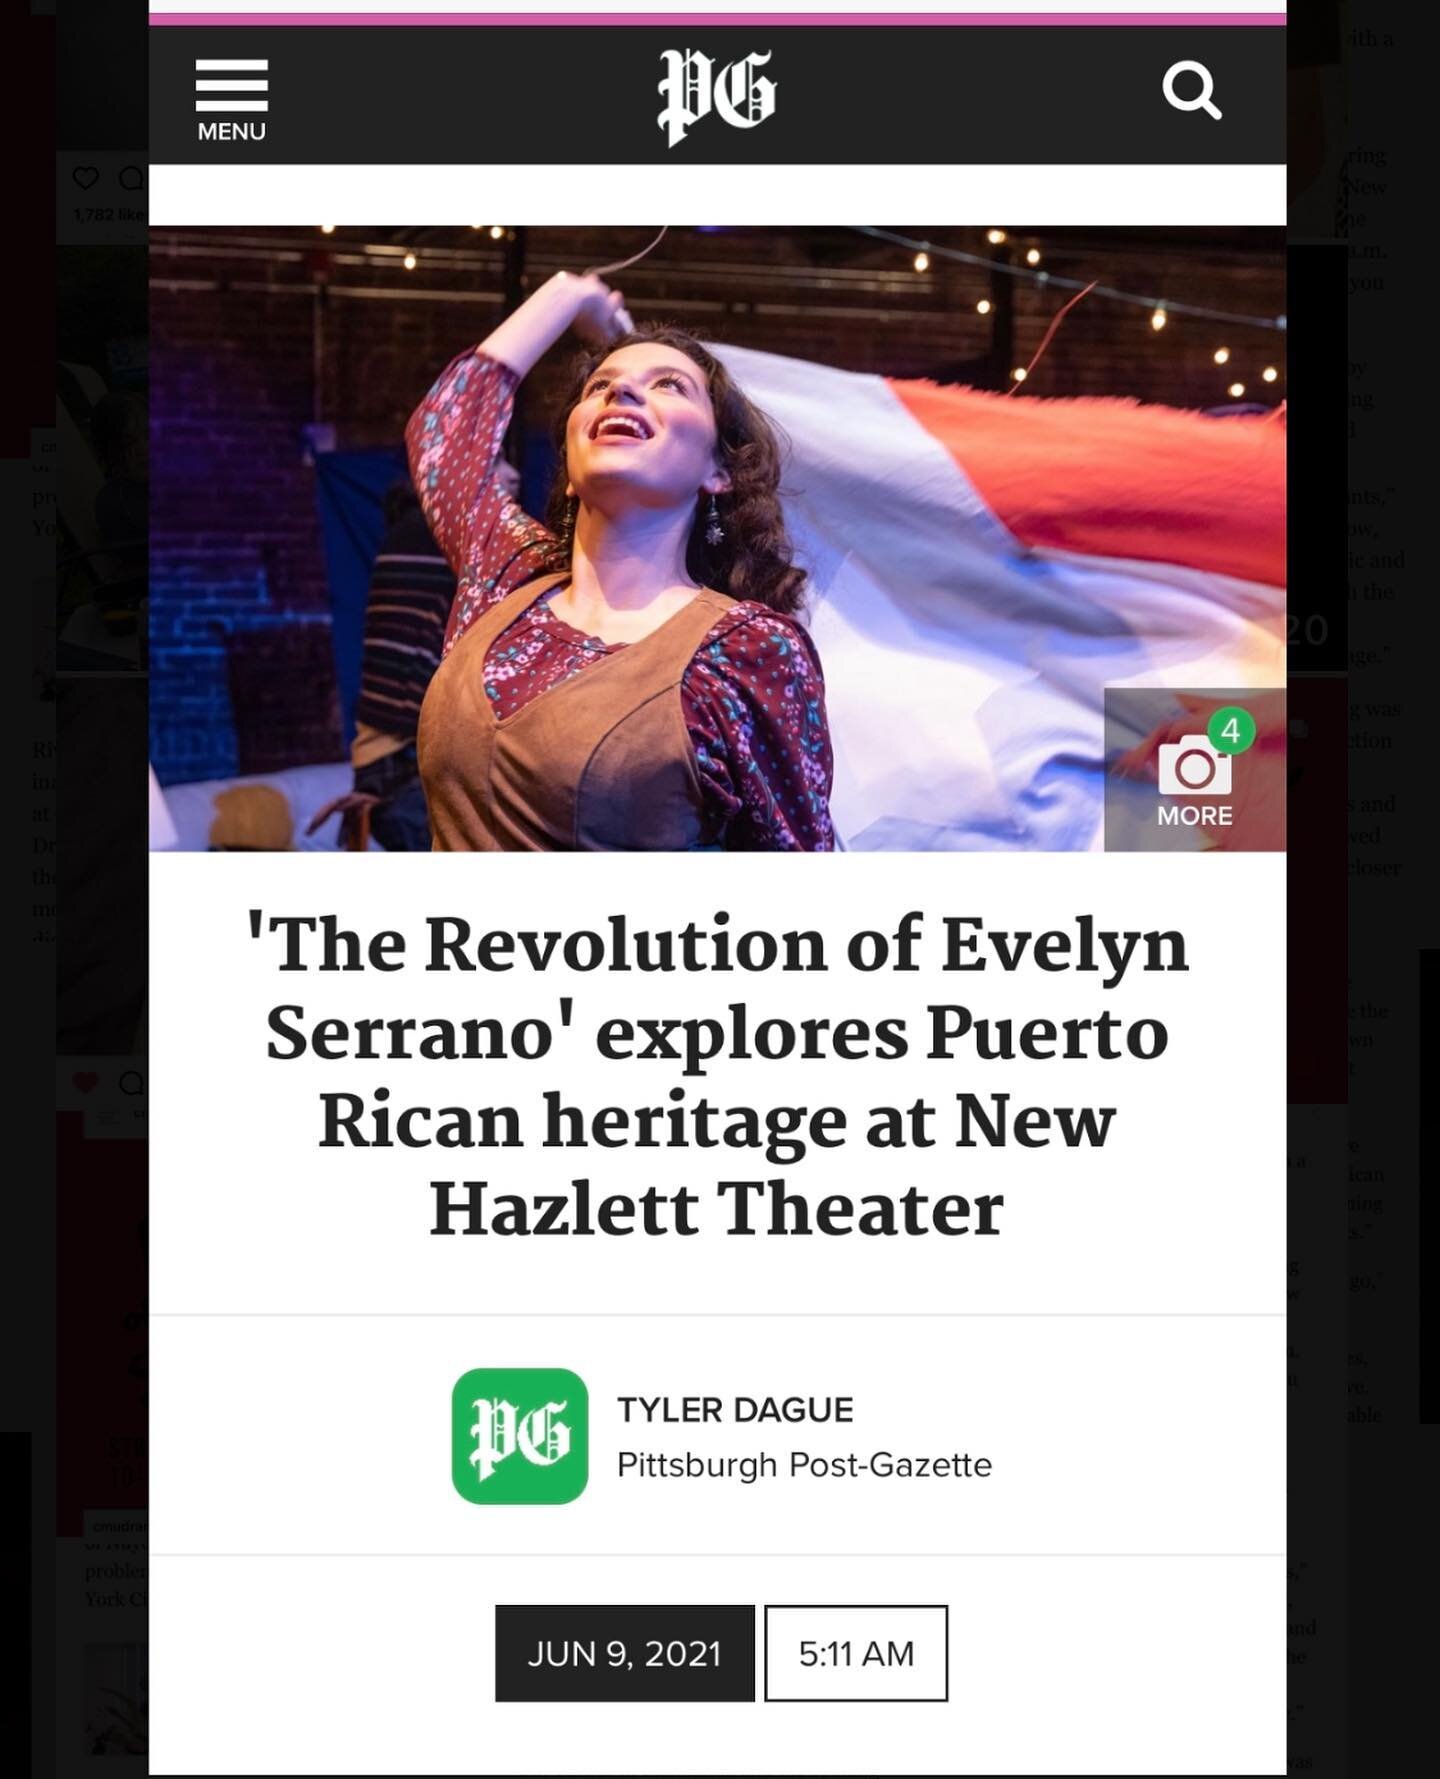 The Revolution of Evelyn Serrano by @tlaloc.rivas (based on the novel by @soniammanzano ) streams today and tomorrow as part of the @newhazlett CSA Series! Check it out!

Original music by @sartjepickett with lyrics by Tlaloc Rivas, with music direct